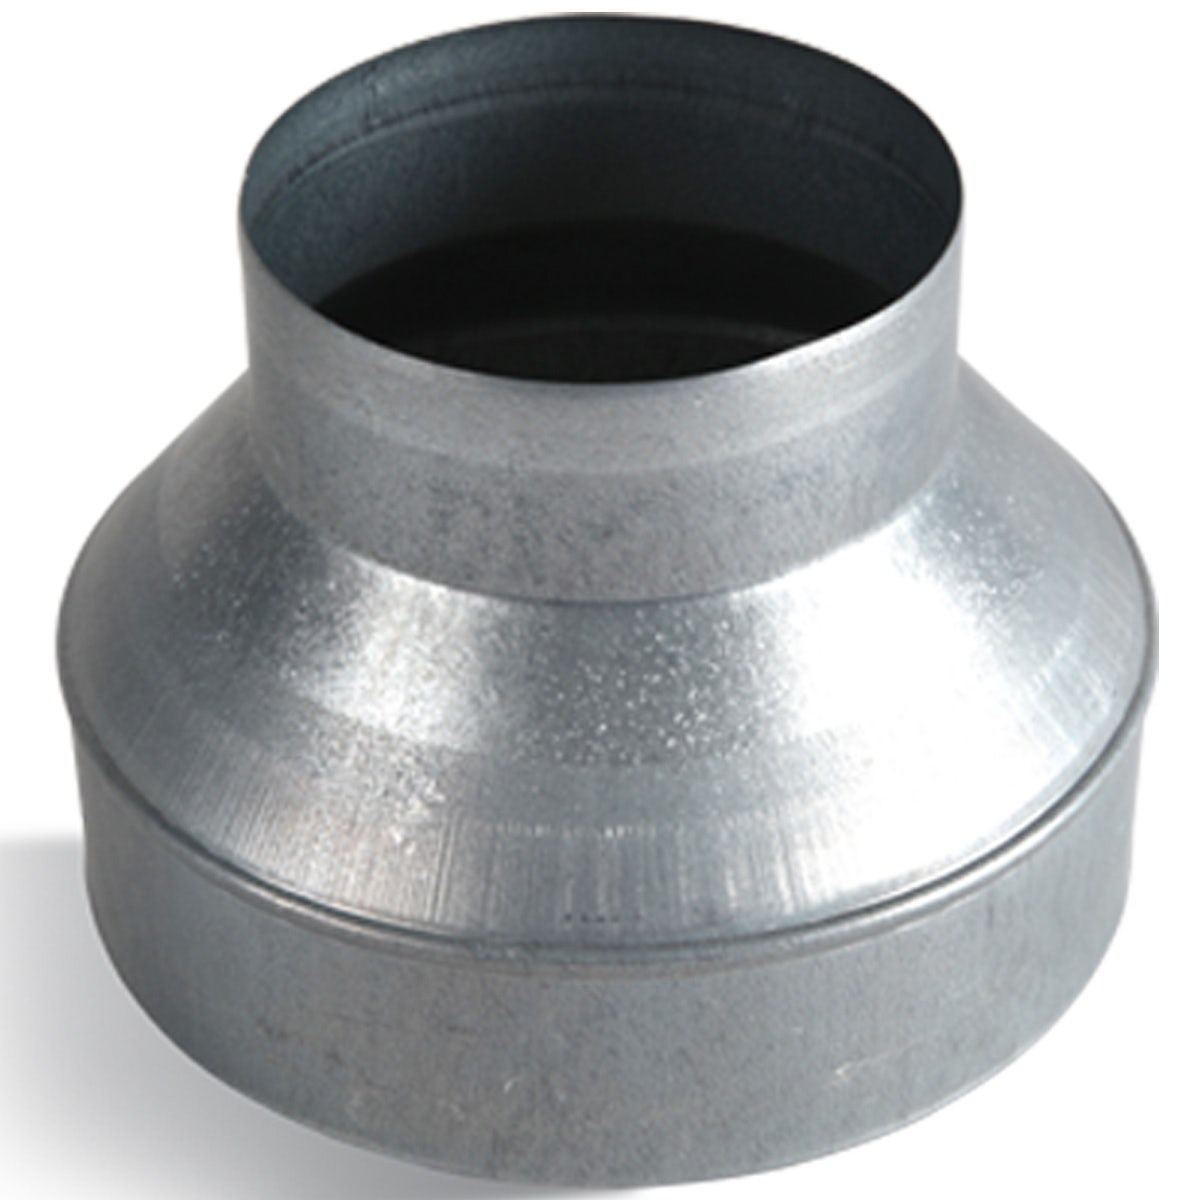 Concentric Ducting Reducer/Enlarger Rigid Ducting Part